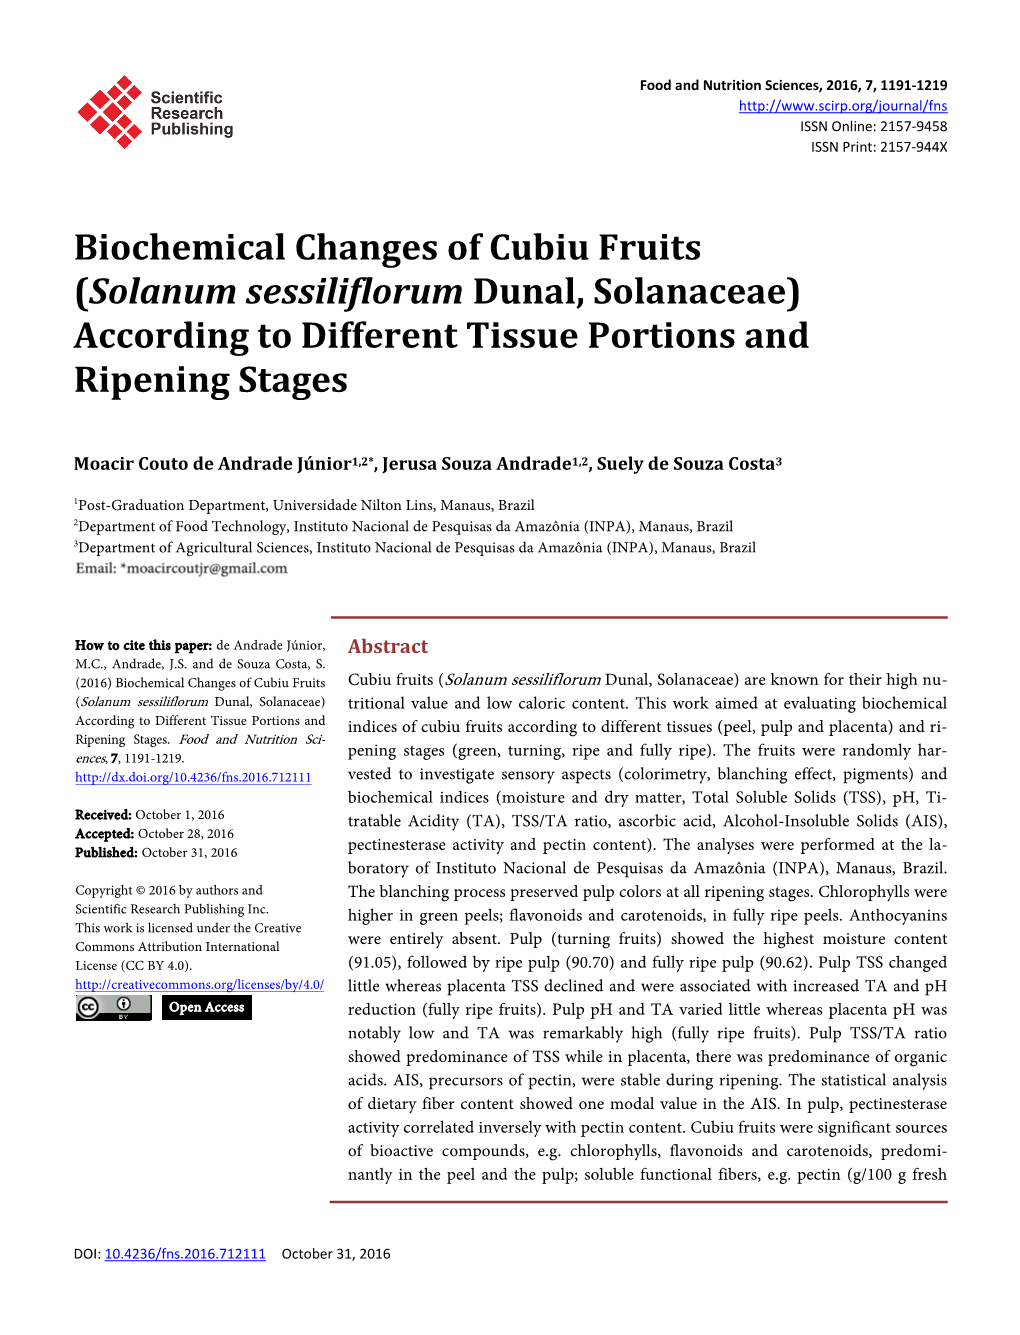 Biochemical Changes of Cubiu Fruits (Solanum Sessiliflorum Dunal, Solanaceae) According to Different Tissue Portions and Ripening Stages